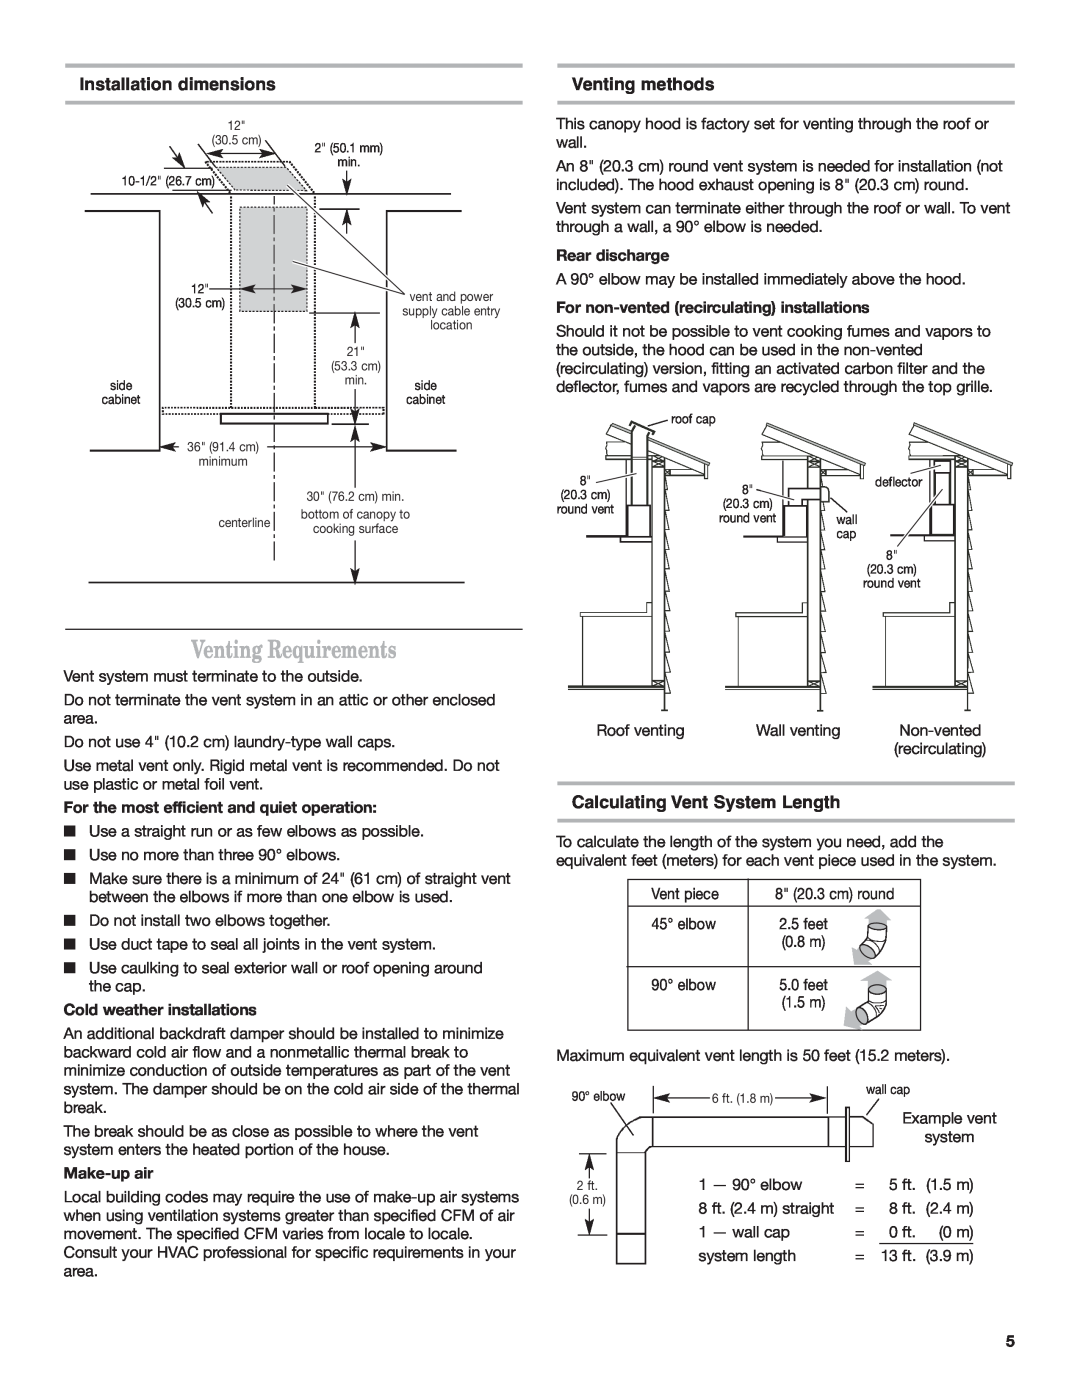 Whirlpool 19760268A Venting Requirements, Installation dimensions, Venting methods, Calculating Vent System Length 